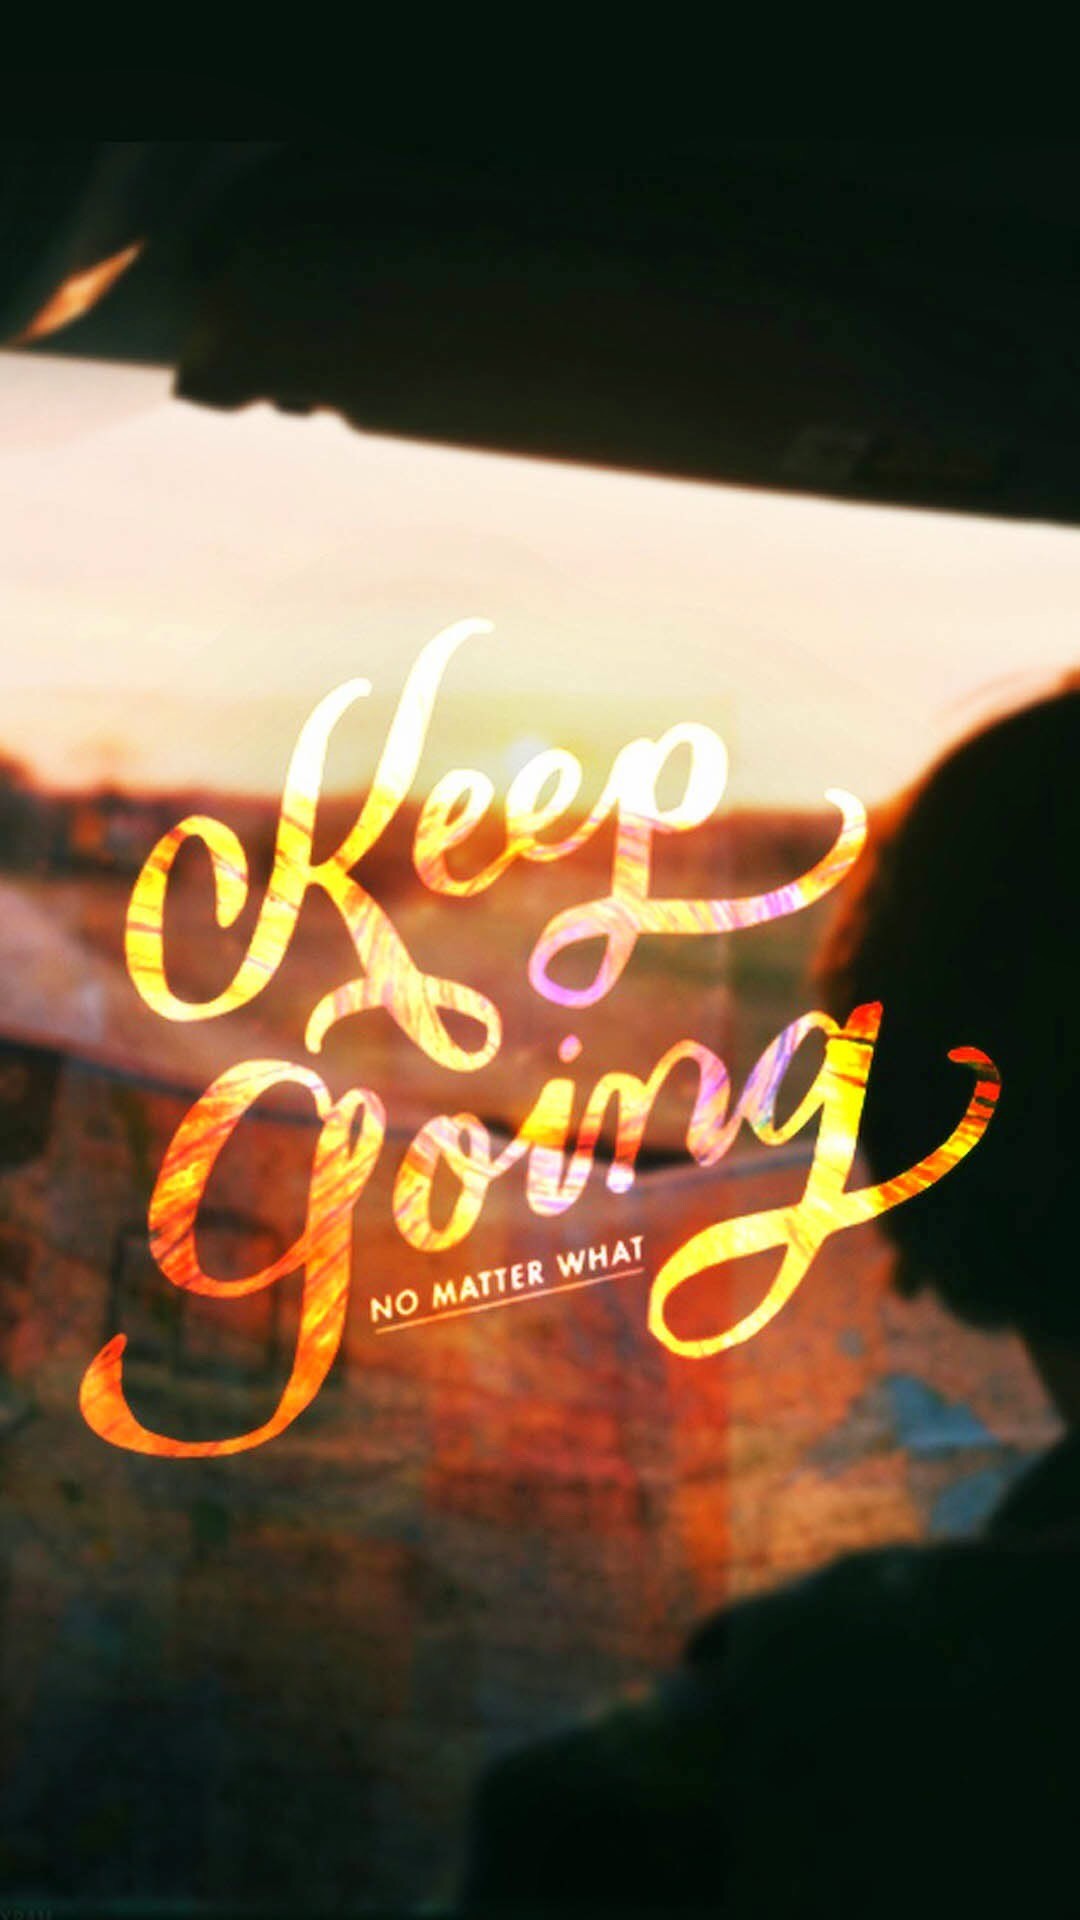 1080x1920 Tap image for more quote wallpapers! Keep Going - @mobile9 | iPhone 6 quotes